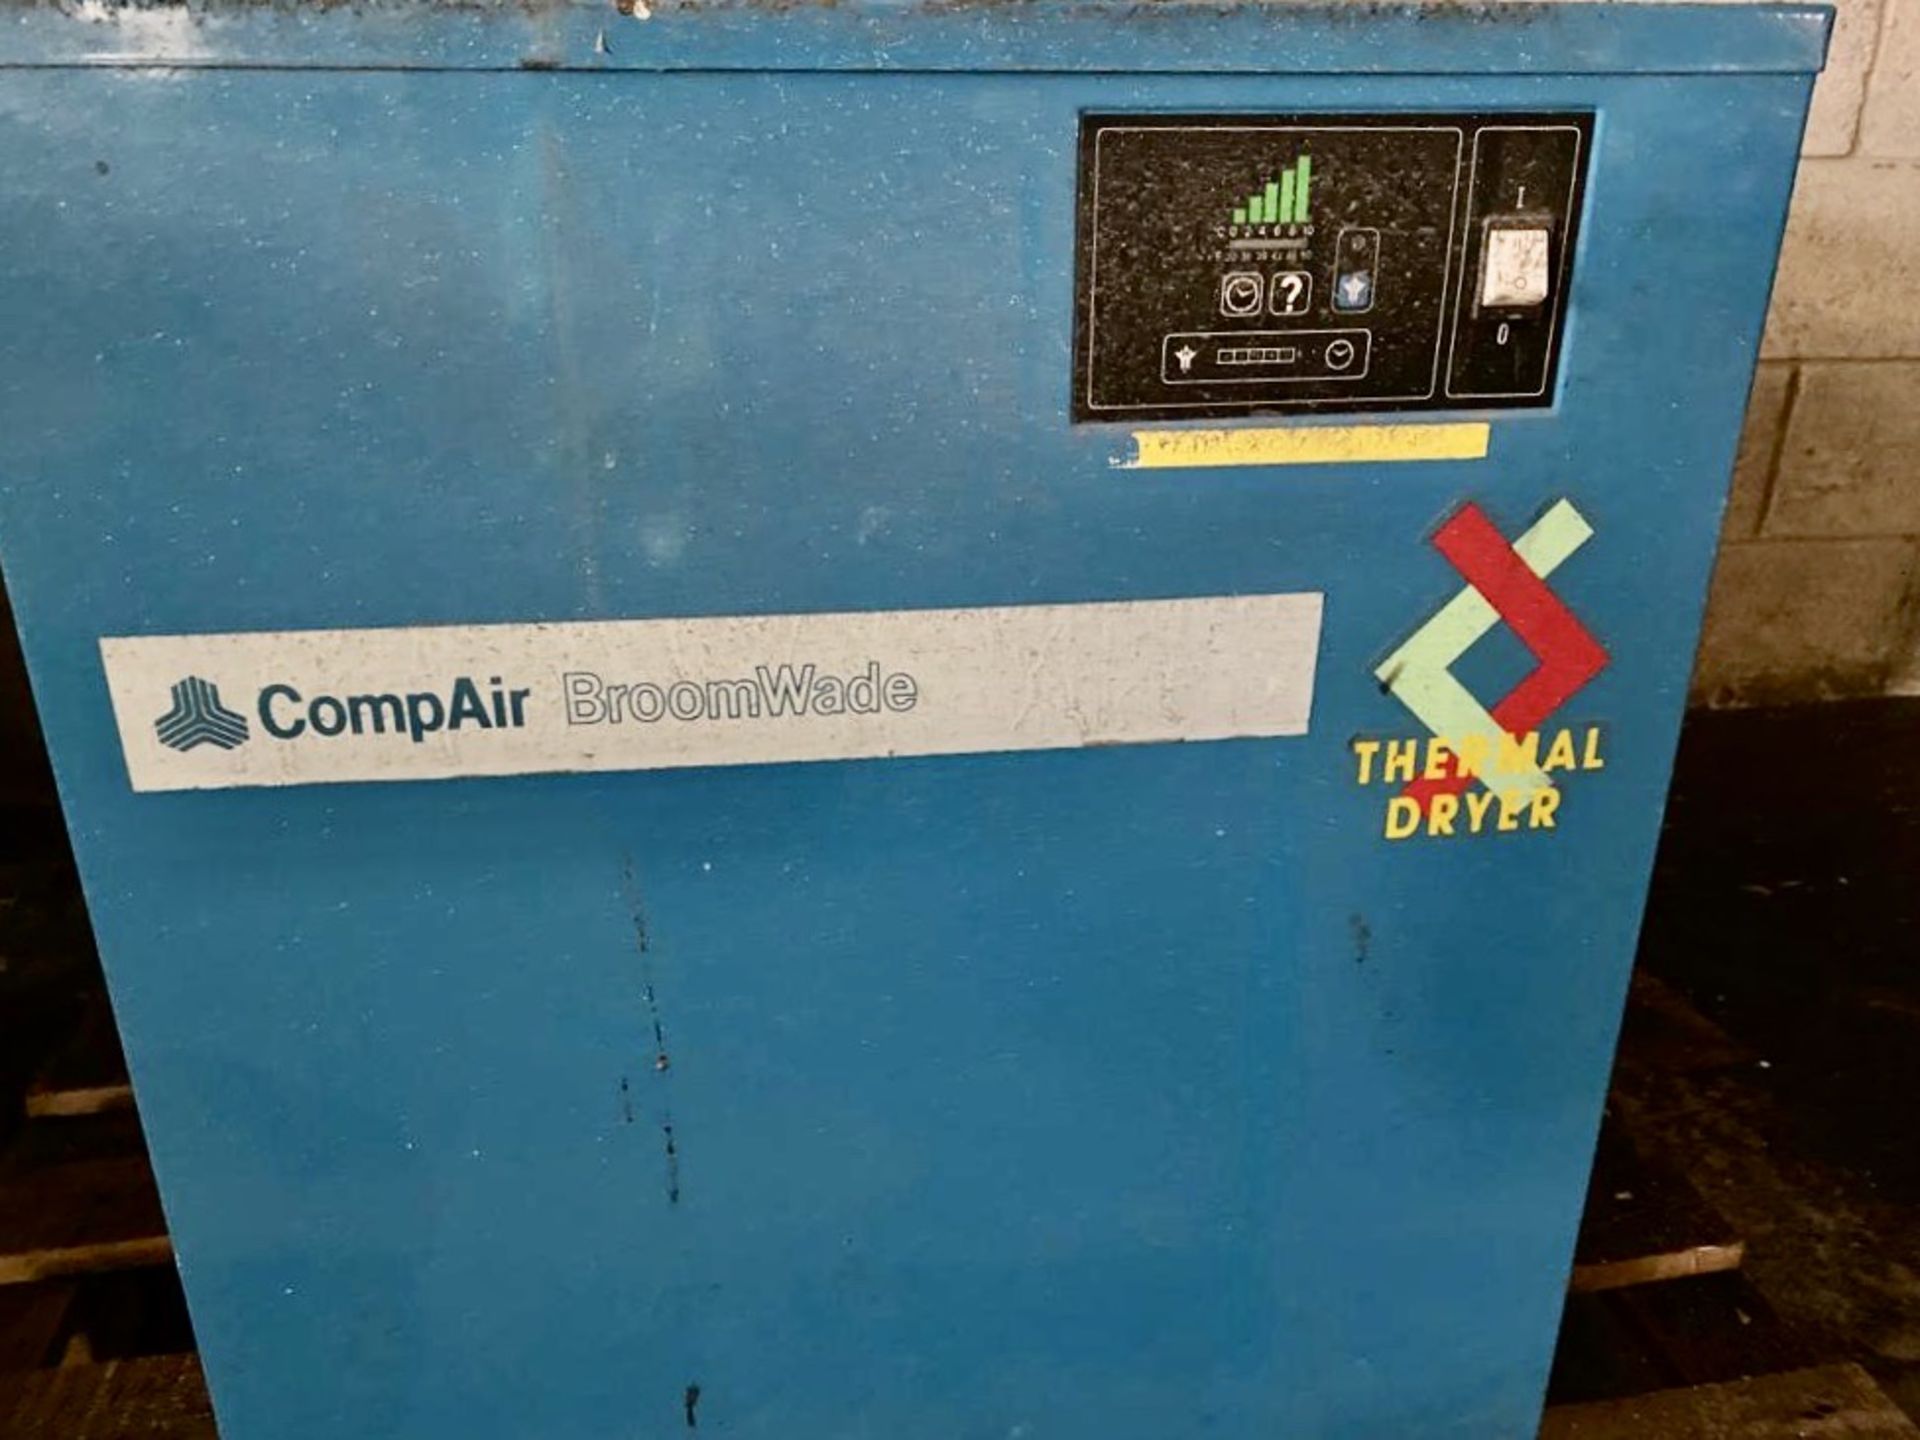 Compair Broomwade Cyclon III Packaged Air Compressor, 10bar, 149m³/min, serial number F162/1200, - Image 5 of 6